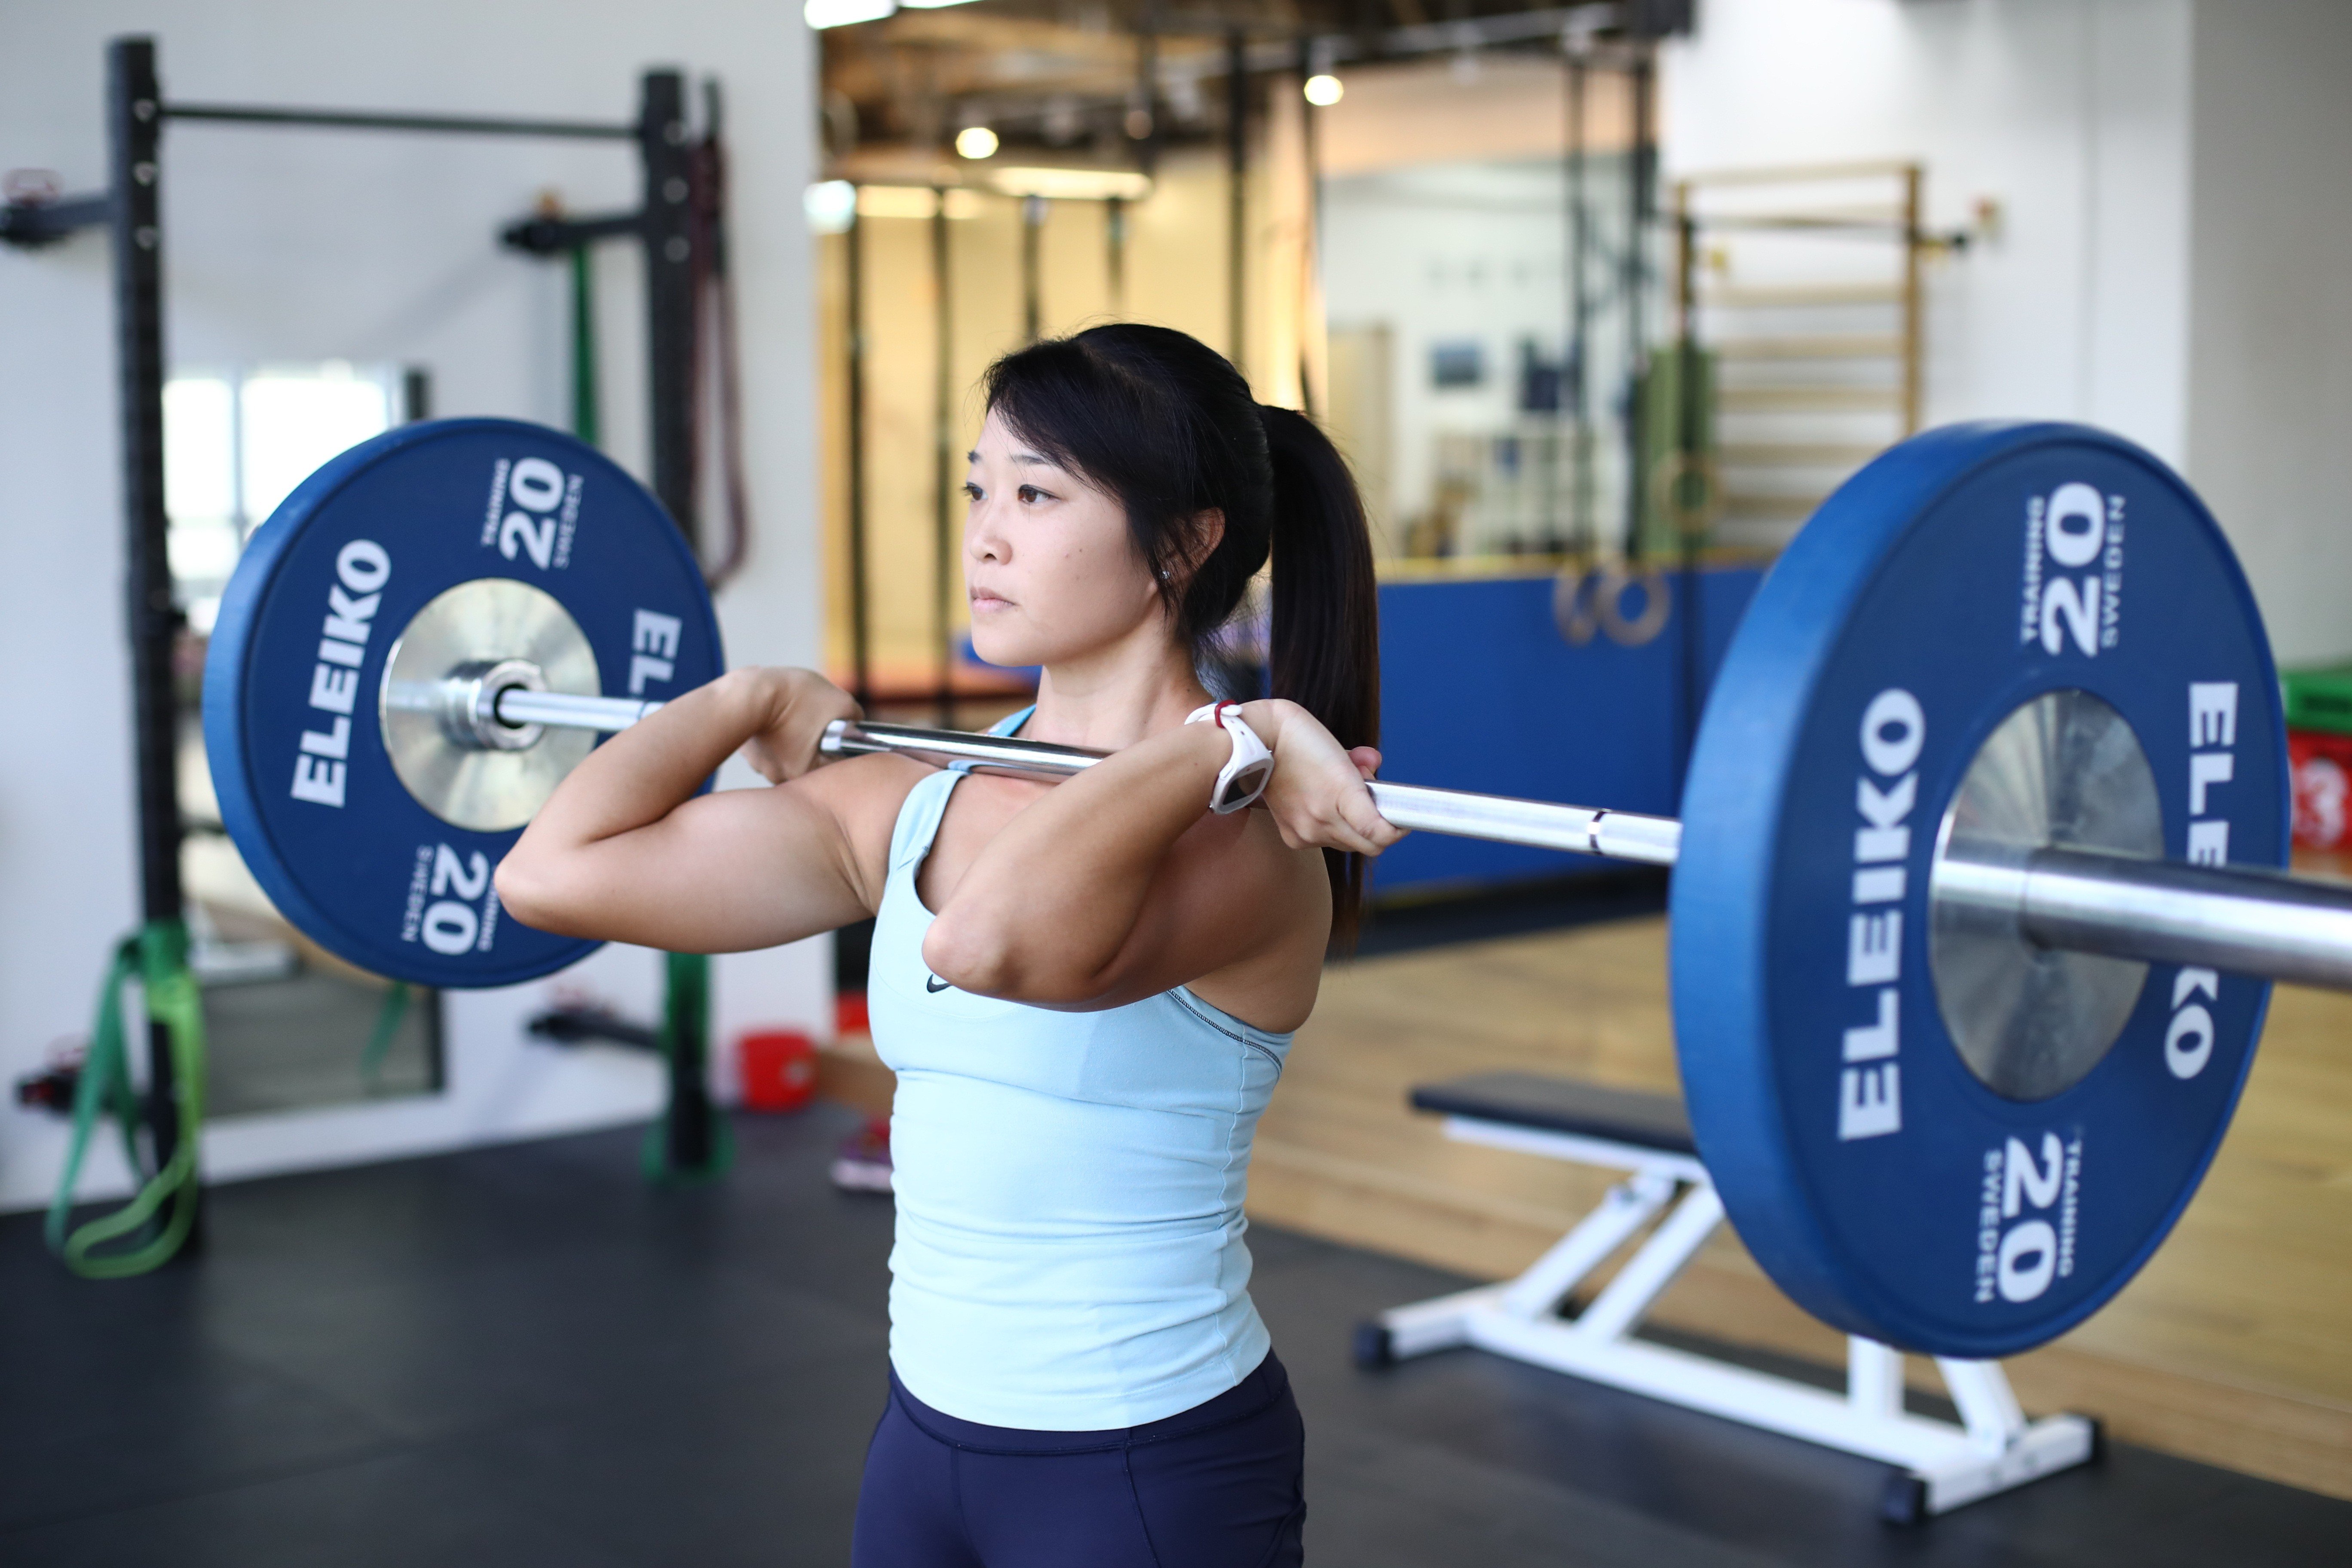 Weightlifter and founder of Trybe Studio, Kay Kay Keung, works out at Trybe Studio in Wong Chuk Hang. Photo: Nora Tam